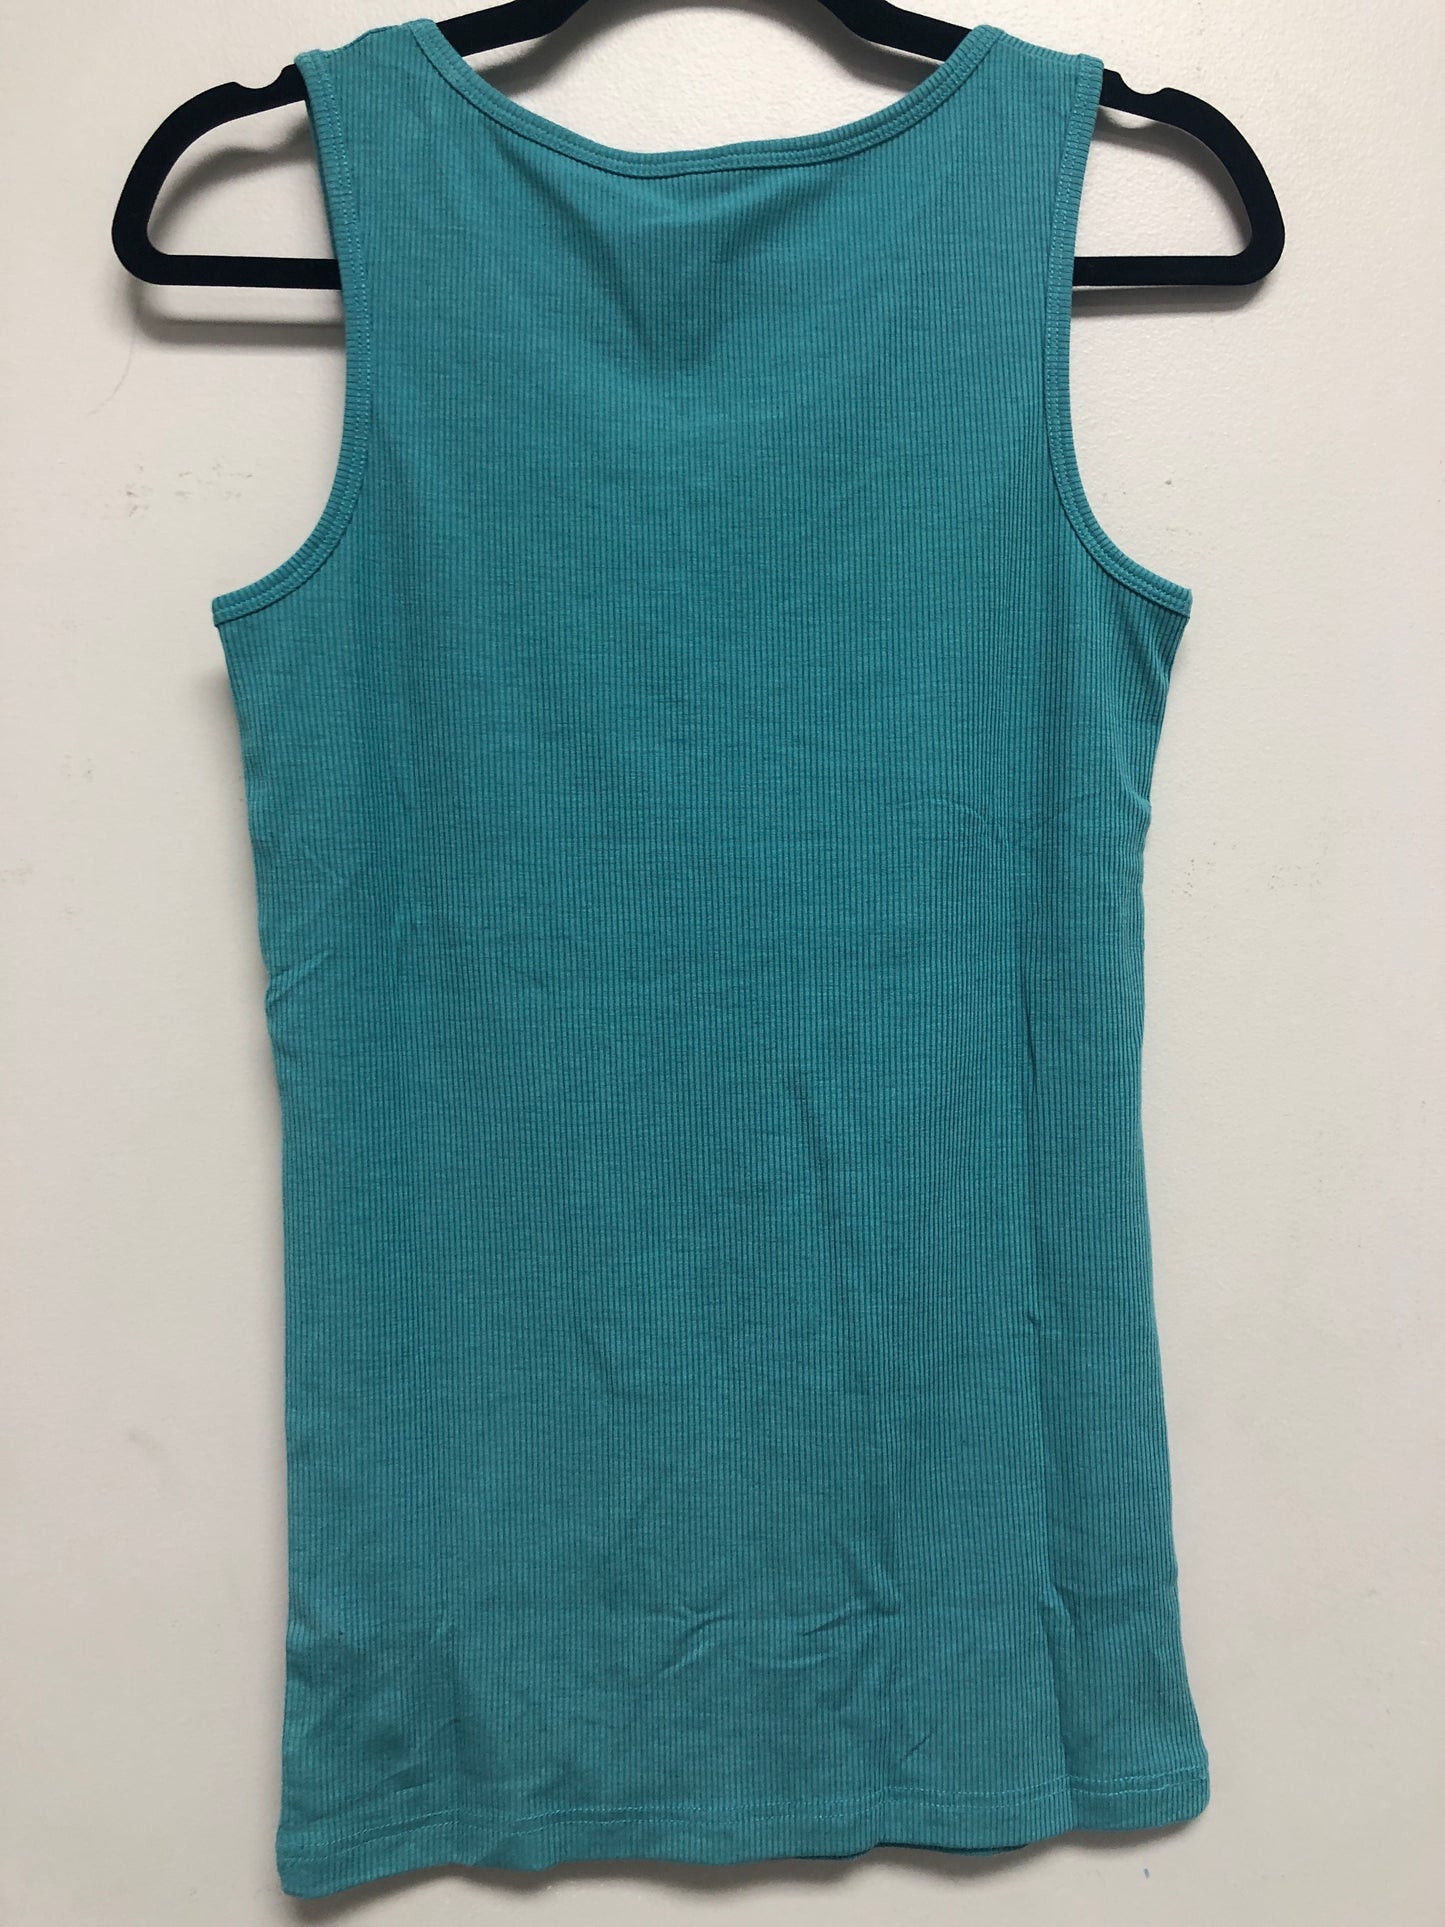 Outlet 6378 - Latched Mama Customized Mama with Kids Ribbed Nursing Tank - Teal - Extra Small